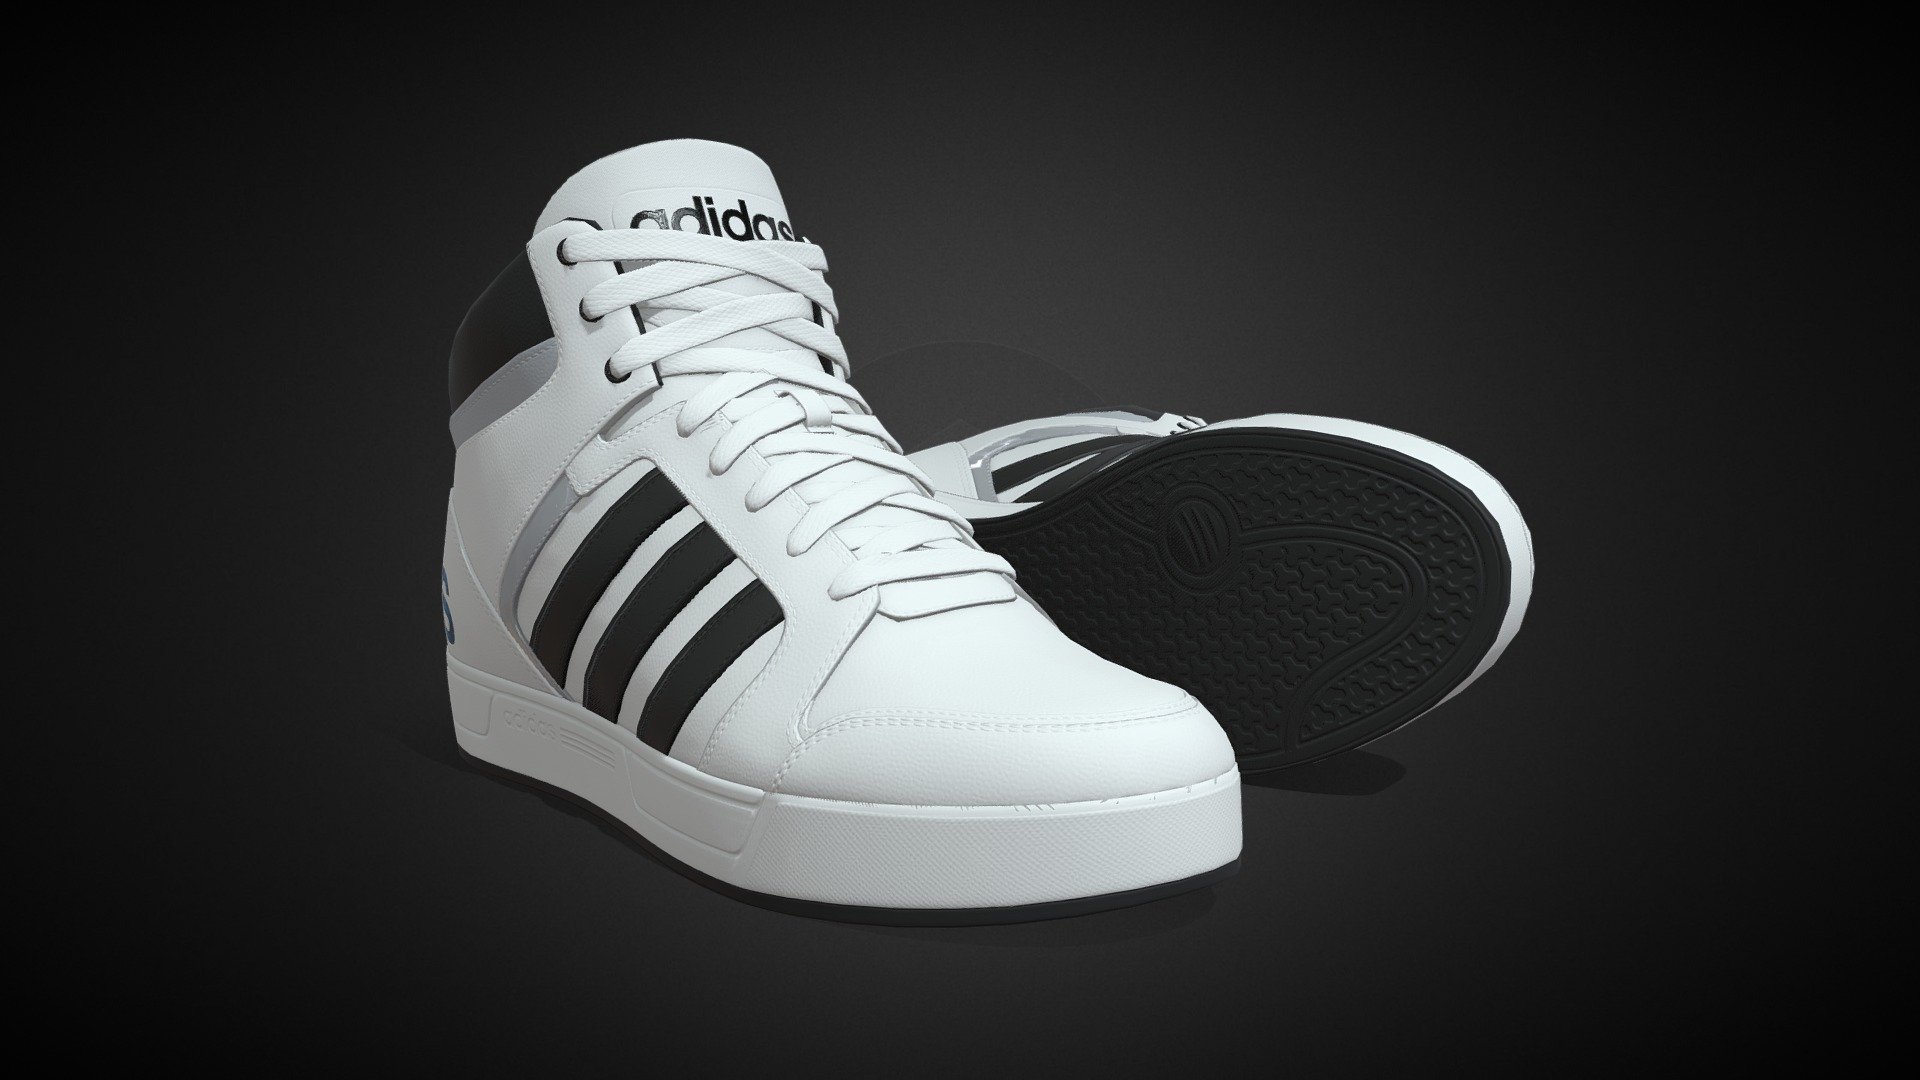 Adidas-NeoRaleigh 9TIS-HighTop Sneakers_white colorway - Adidas-NeoRaleigh 9TIS-HighTop Sneakers - 3D model by maxwell (@manacards) 3d model